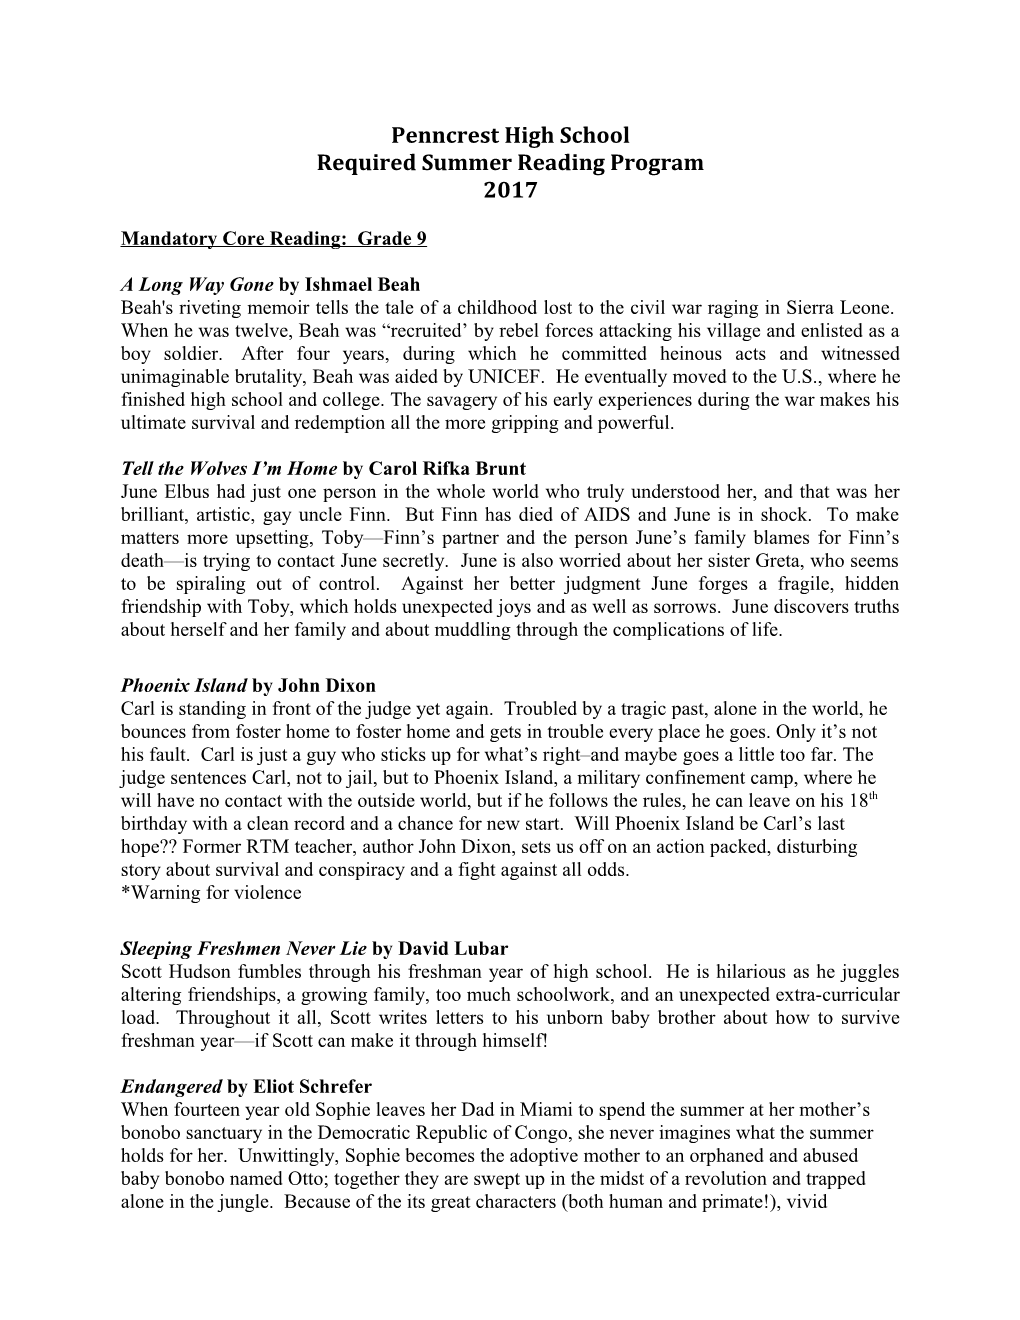 Required Summer Reading Program s1